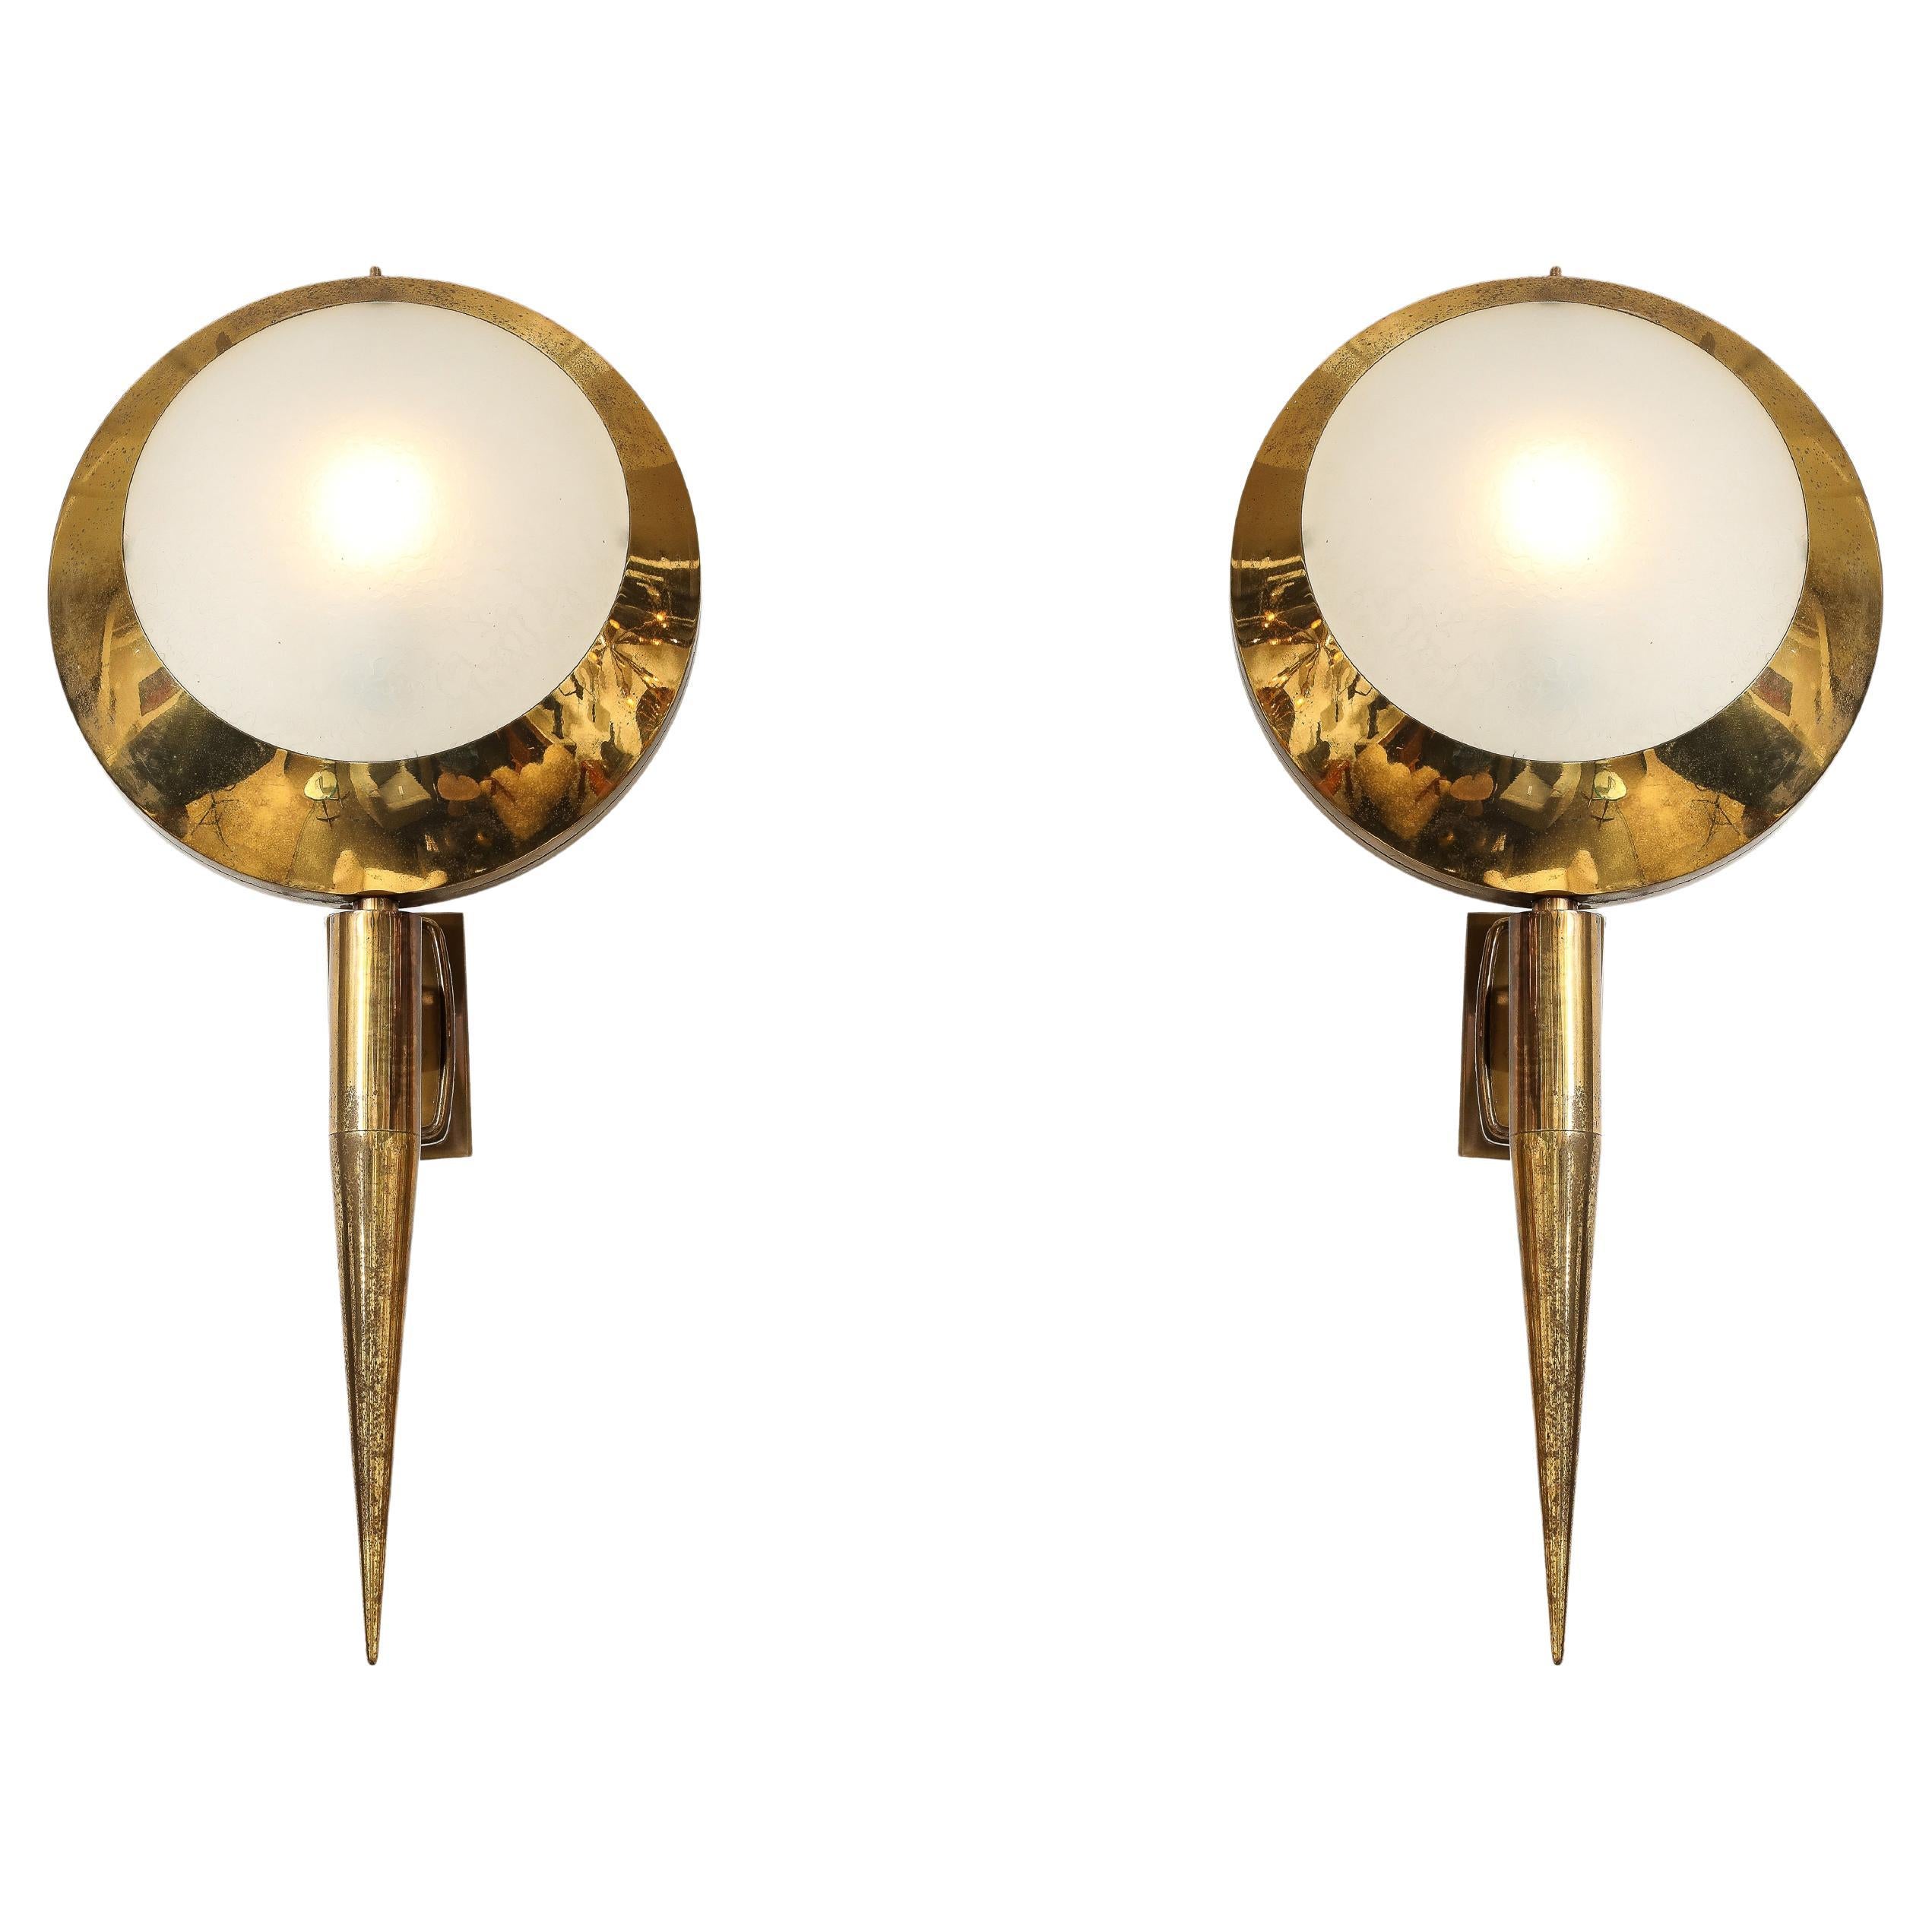 Stilnovo Rare Large Pair of Sconces Model 2128 in Brass and Glass, 1950s